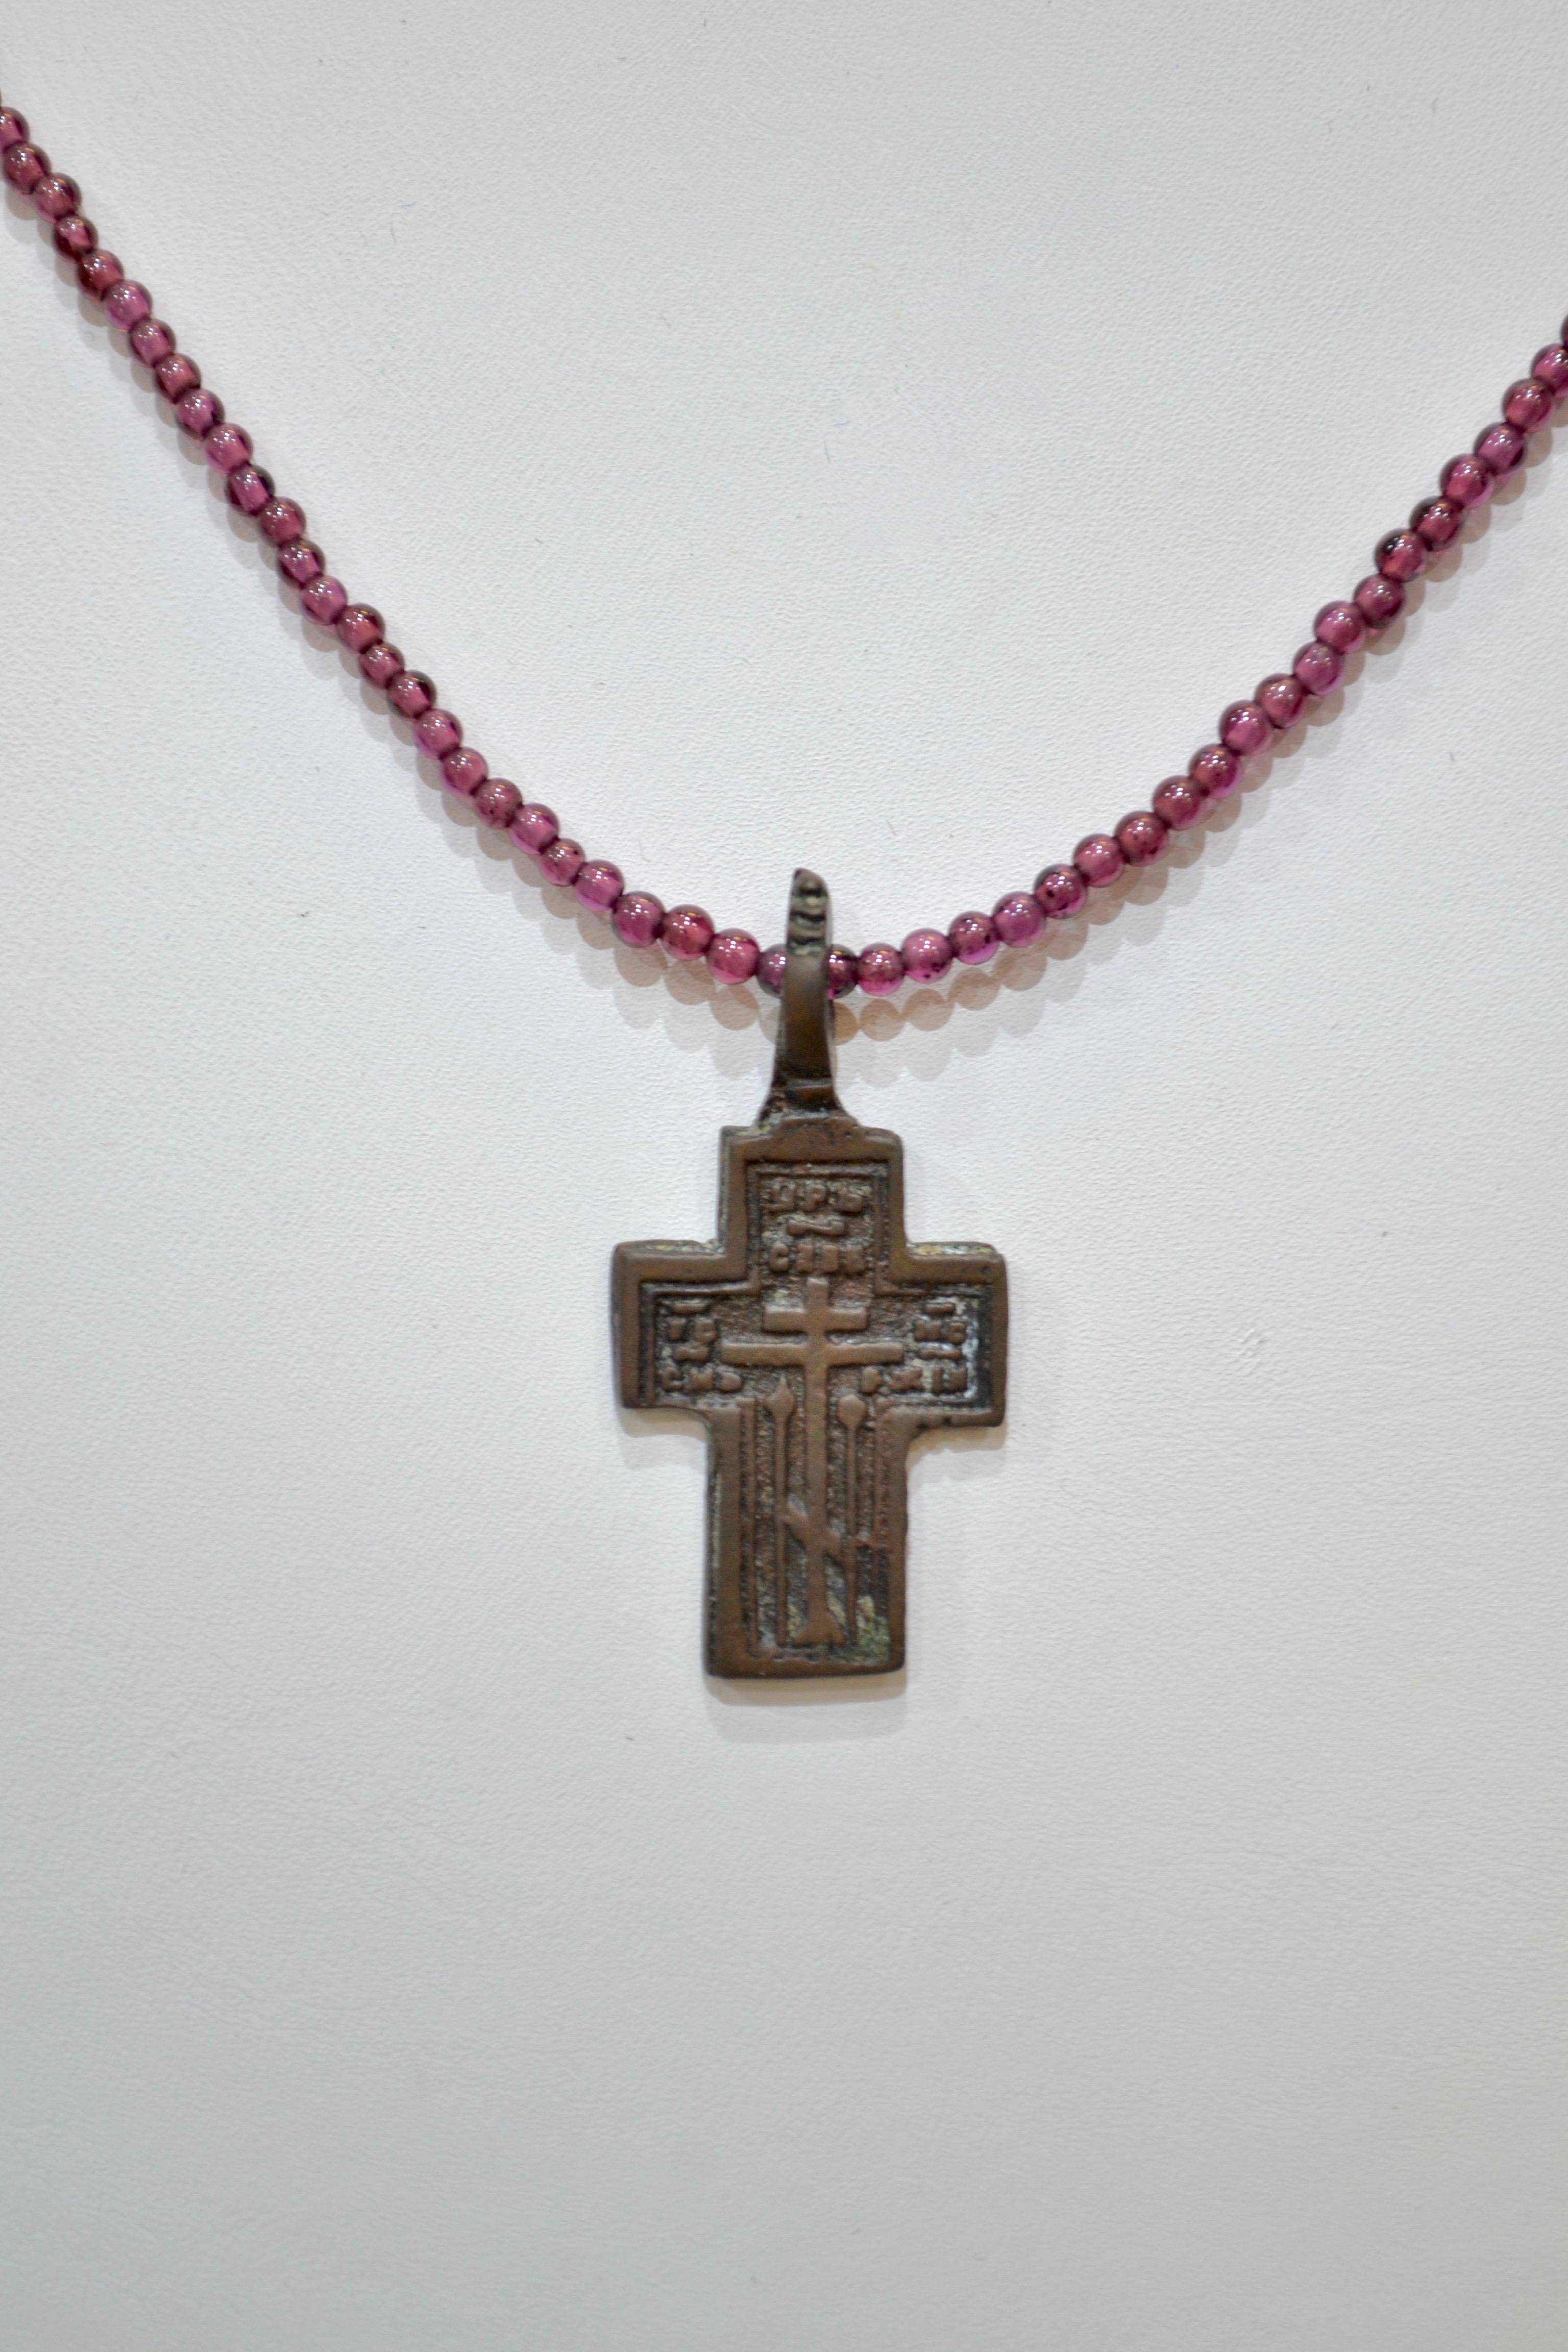 Late Medieval Bronze Cross Pendant. Professionally cleaned and polished to show original details. Obtained from an old British collection, acquired from the L.C.F. (London). Bright garnet beads necklace accompanies this piece.